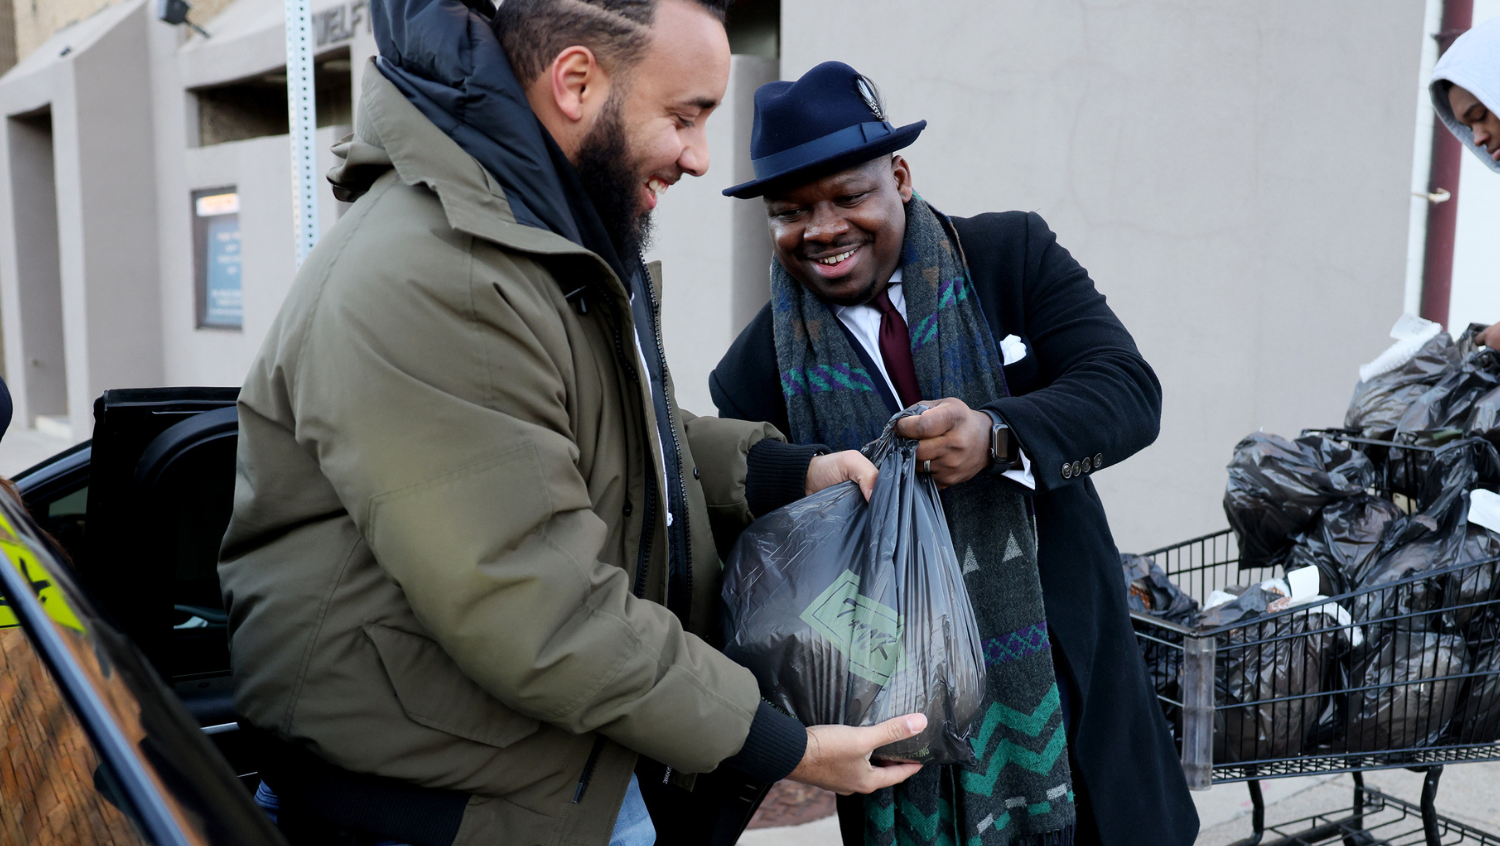 Two Black men are smiling at one another. The man facing the camera is wearing a top hat and carrying a frozen turkey in a bag as he hands it to the other man. 